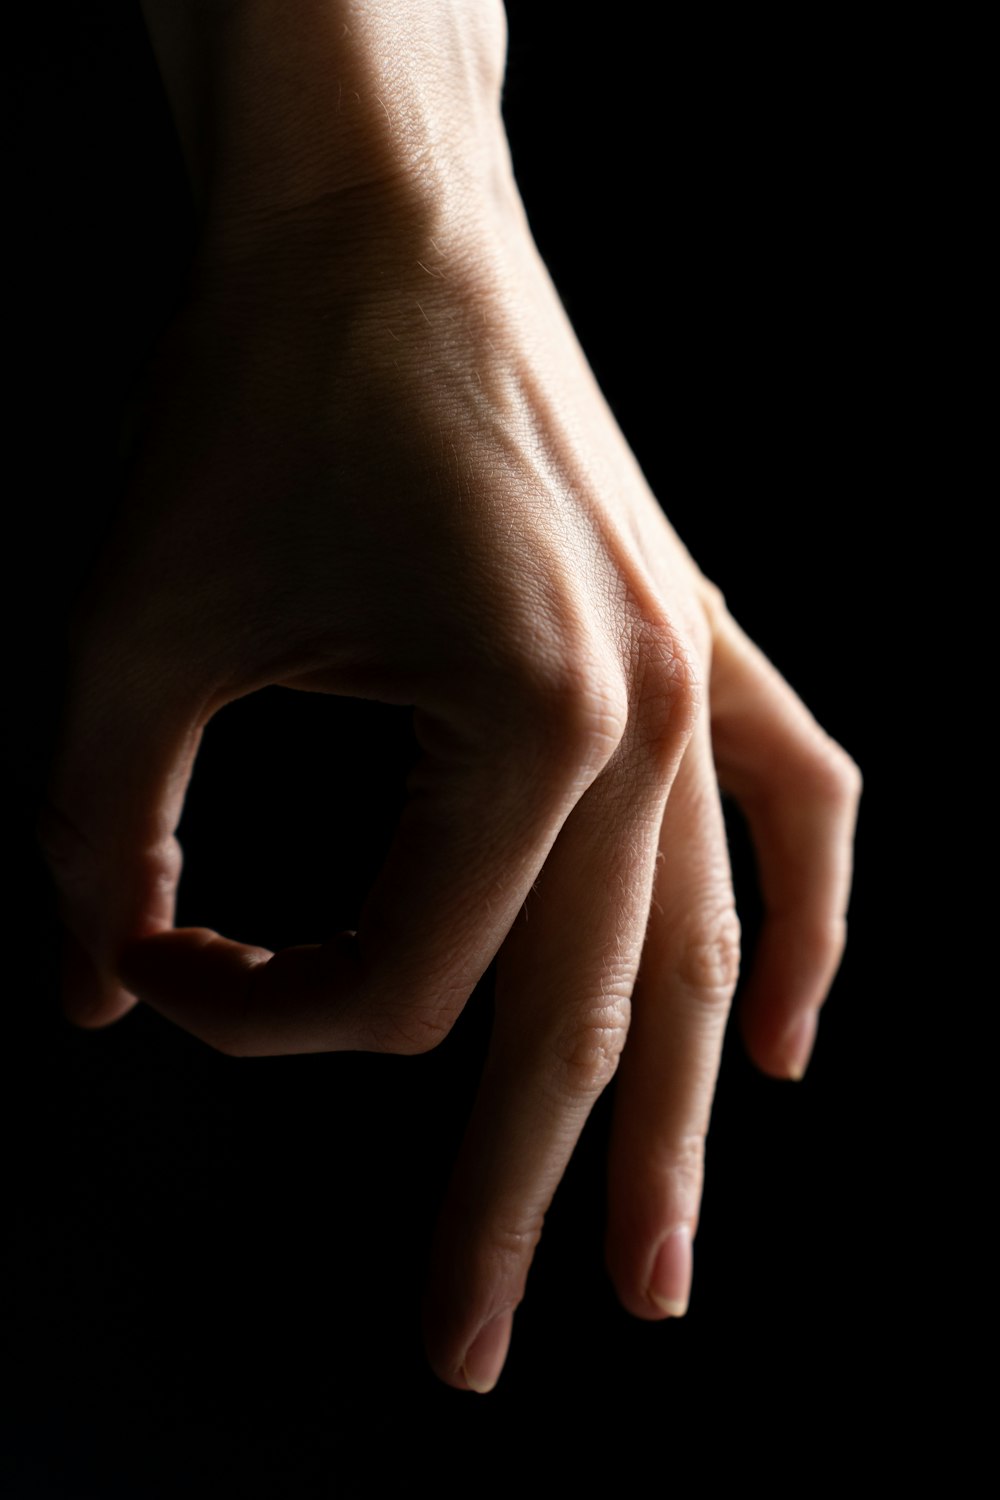 a person's hand reaching out towards the camera